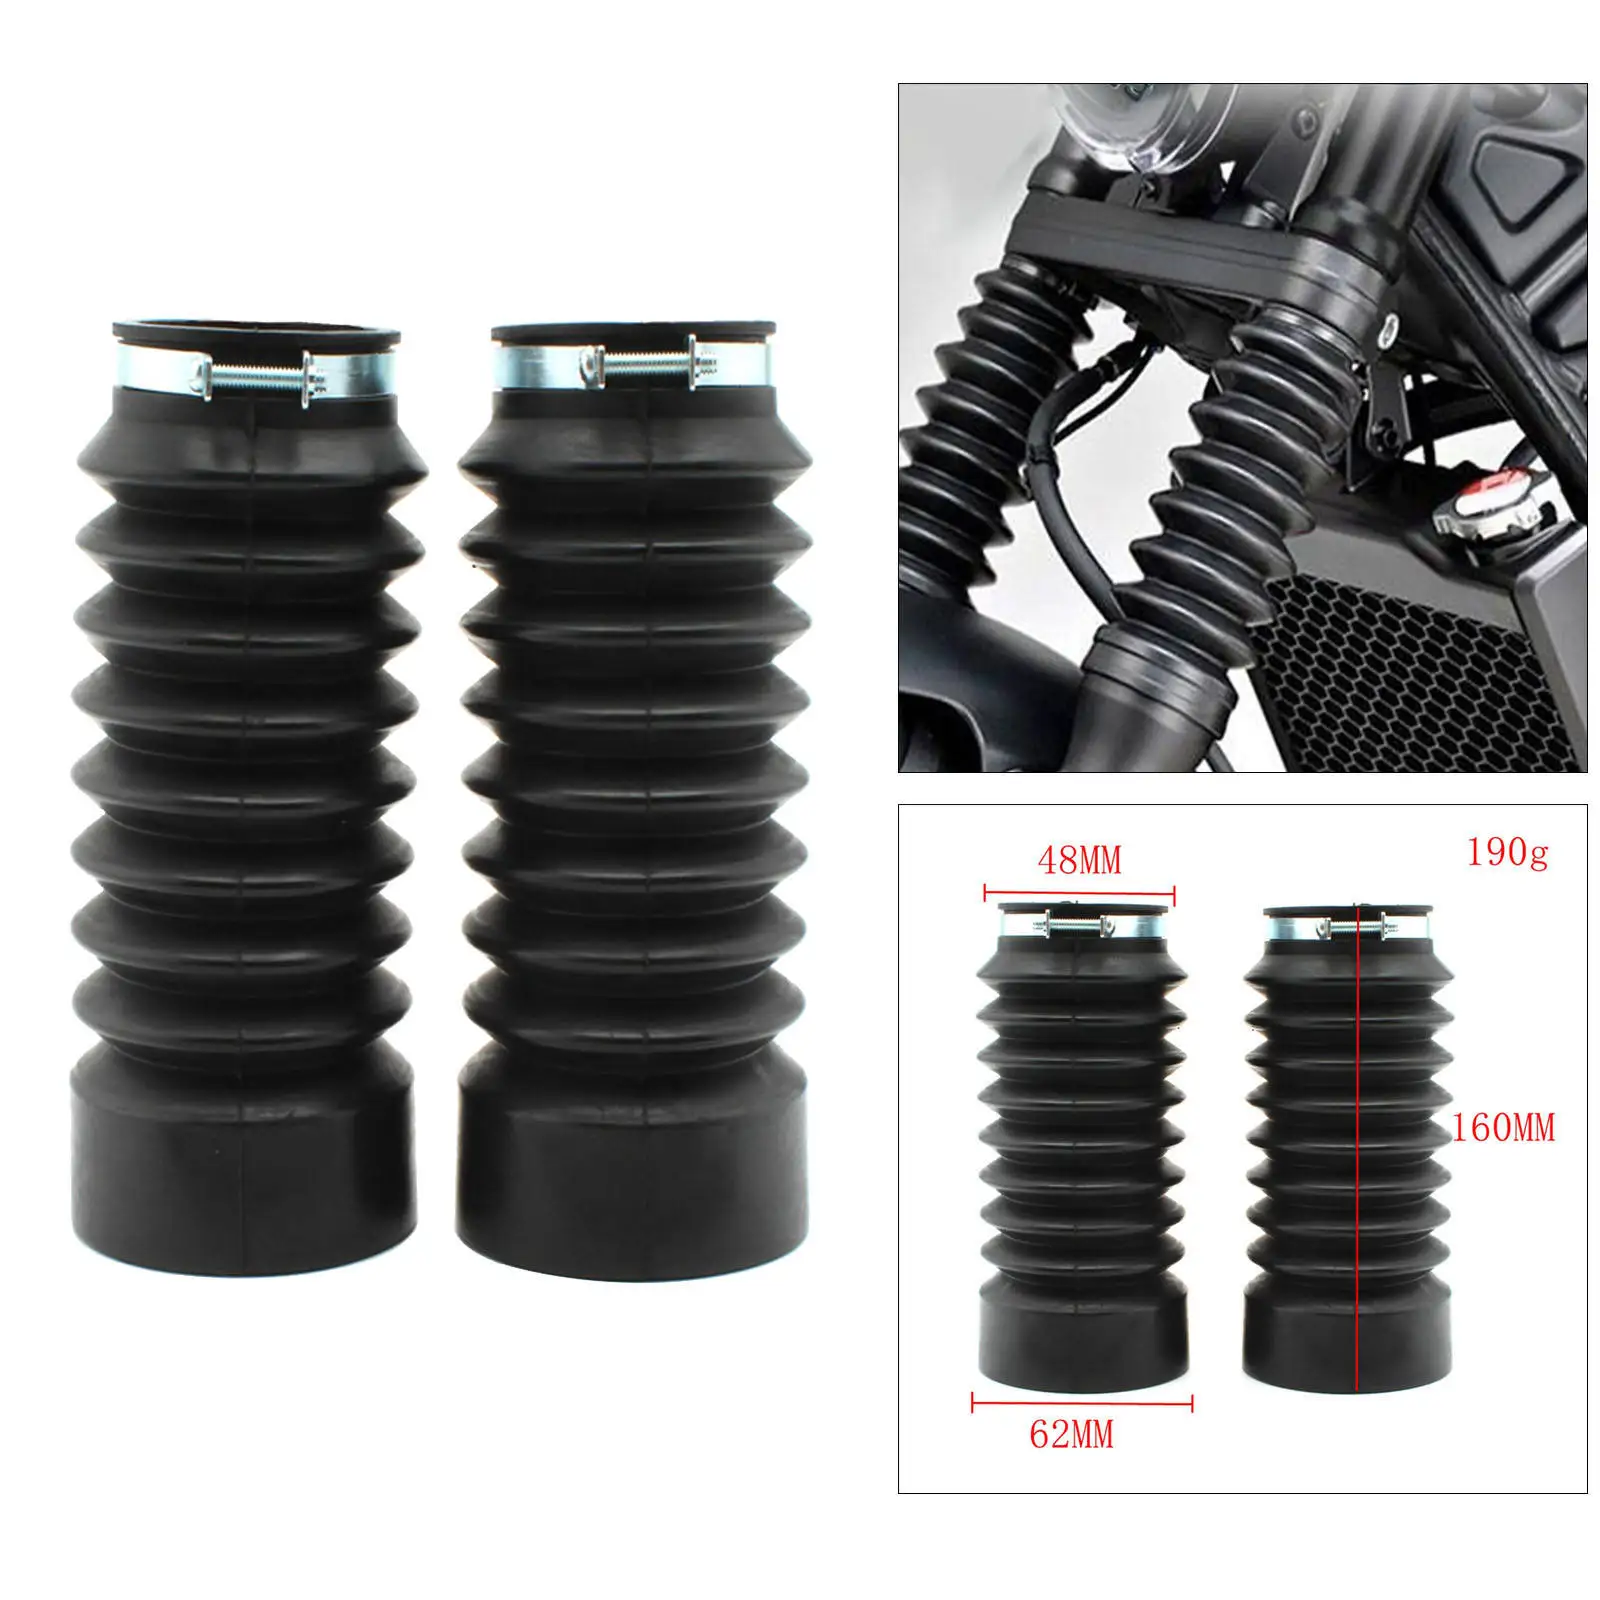 2x Rubber Motorcycle Front Fork Dust Cover Gaiters Gaitors Boots Shock Absorber 